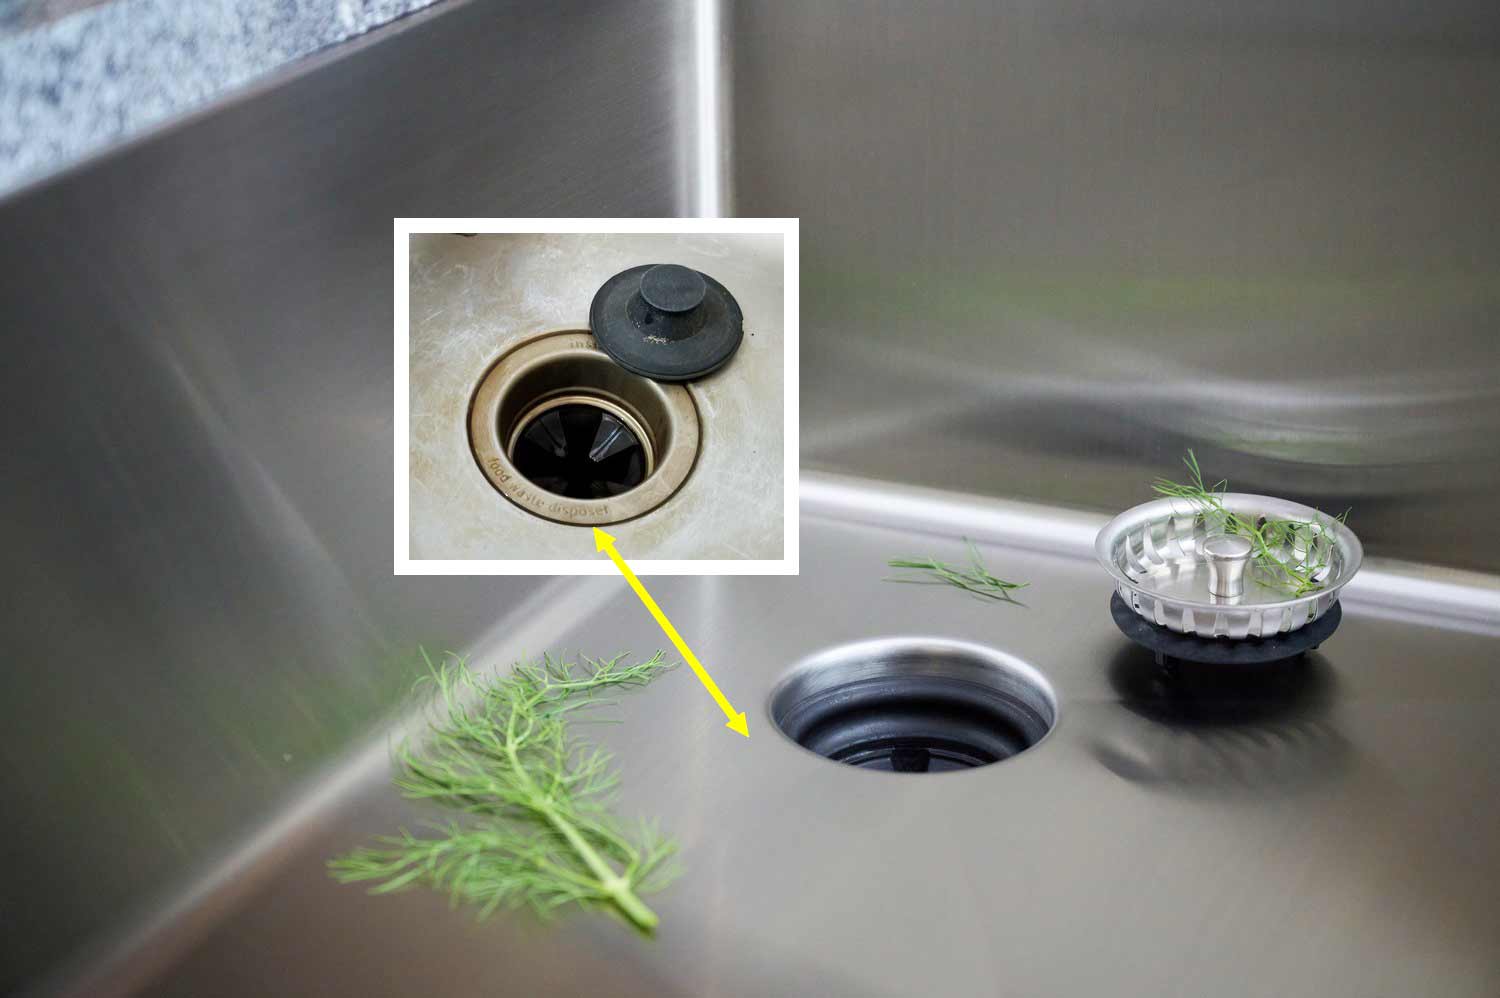 Create Good Sinks new Seamless Drain feature gets rid of the dirty seam around traditional drains